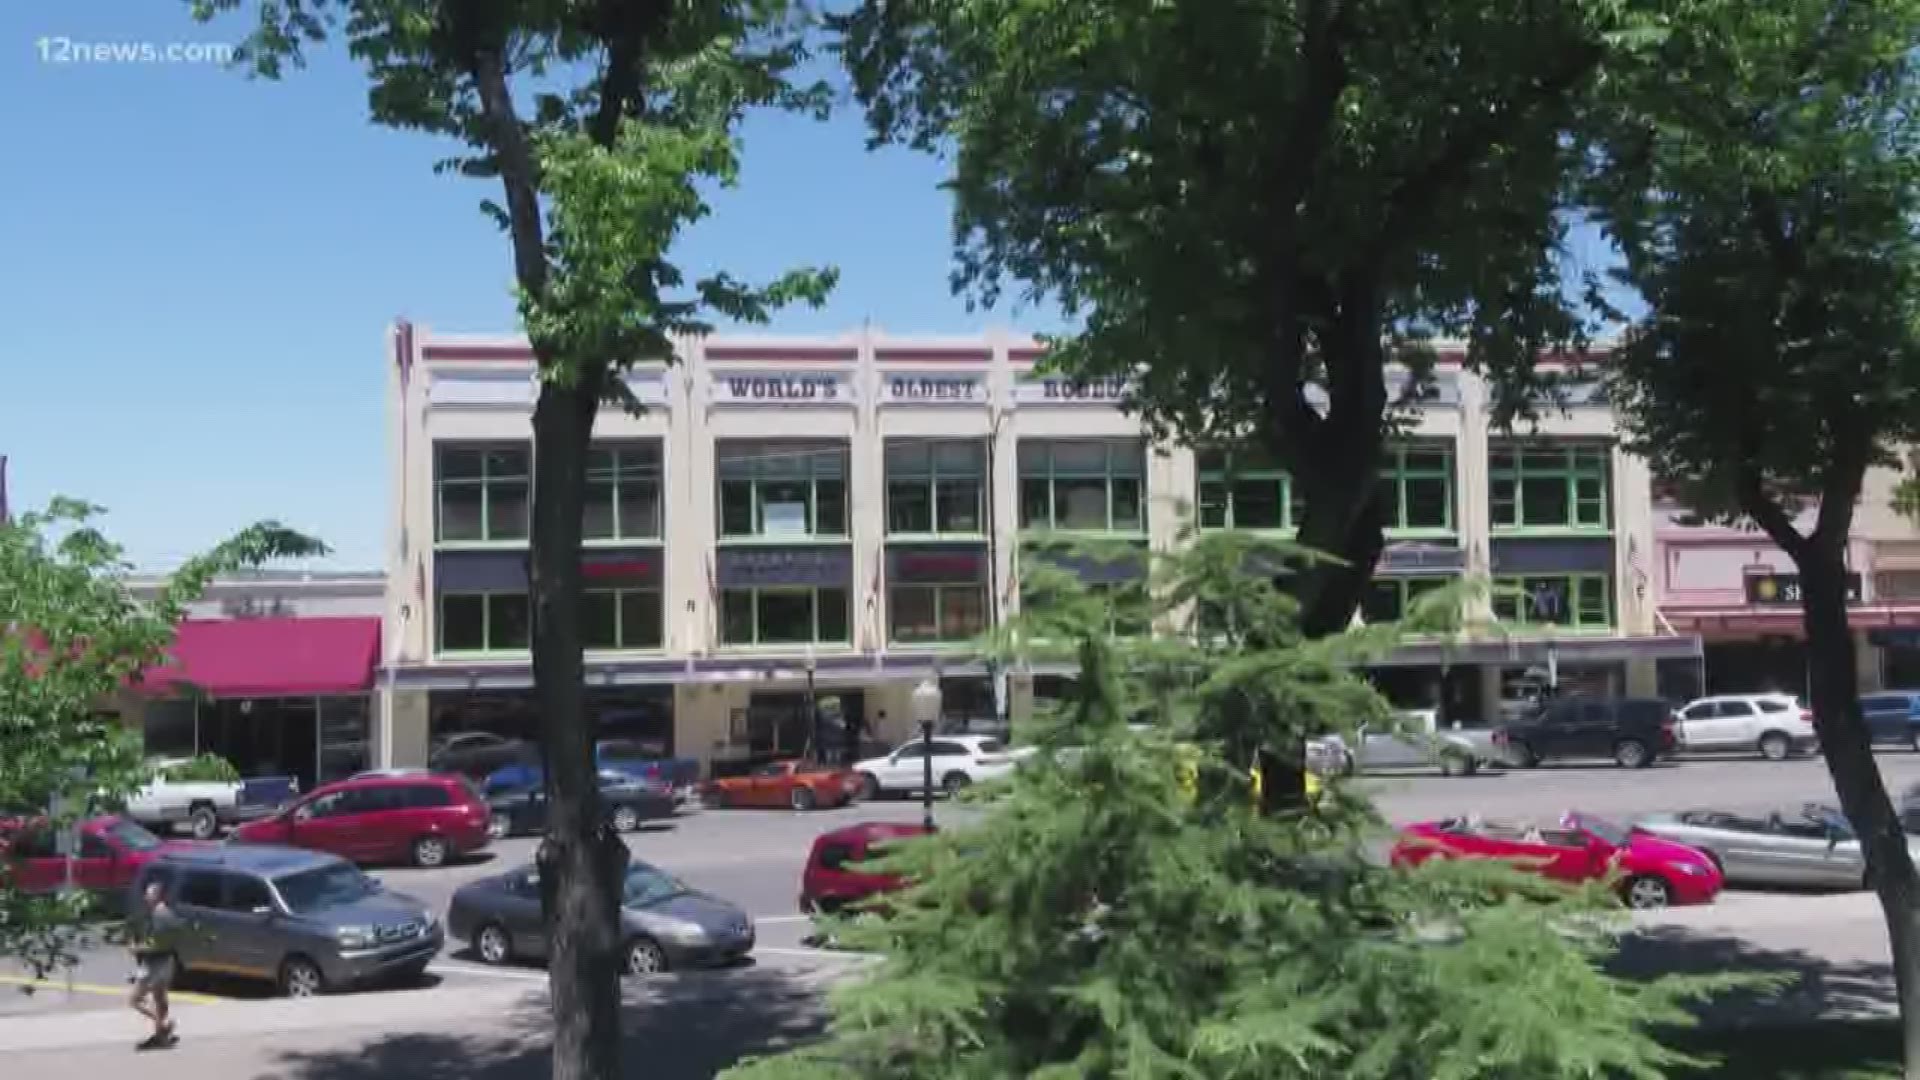 12 News announces we're featuring the town of Prescott the week of July 2 for the Everywhere A to Z series.